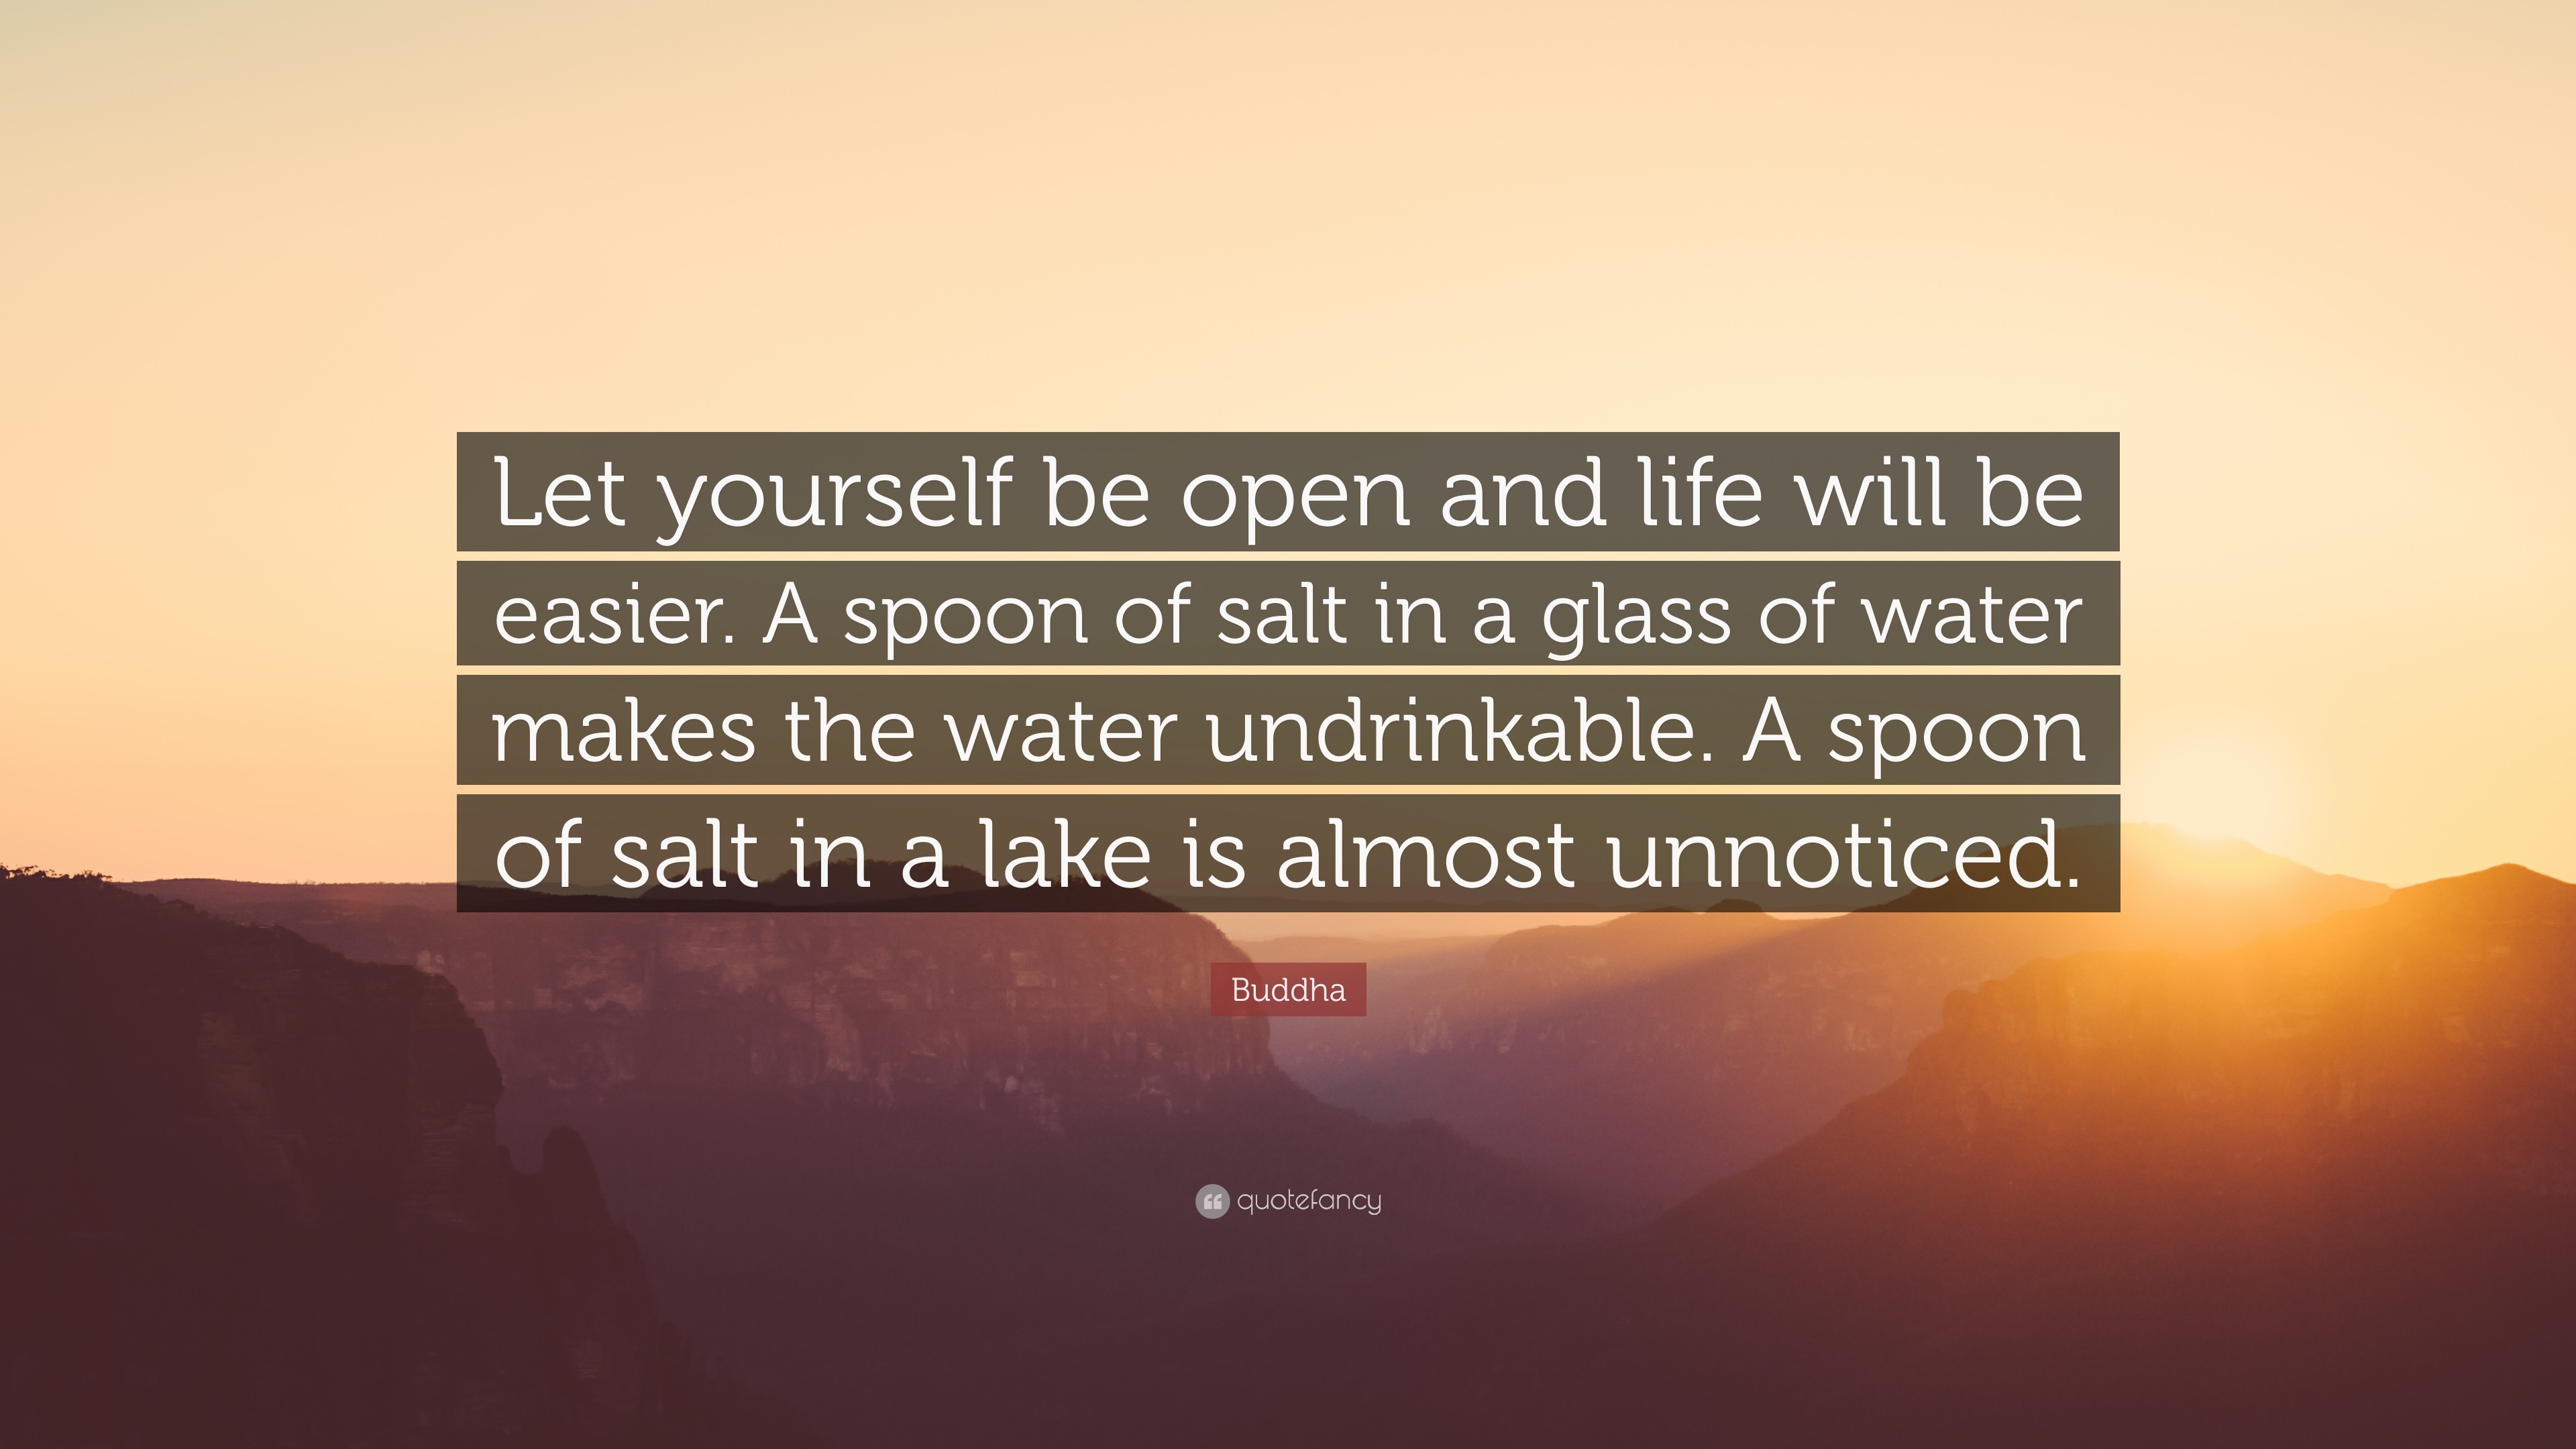 Buddha Quote Let yourself be open and life will be easier. A spoon